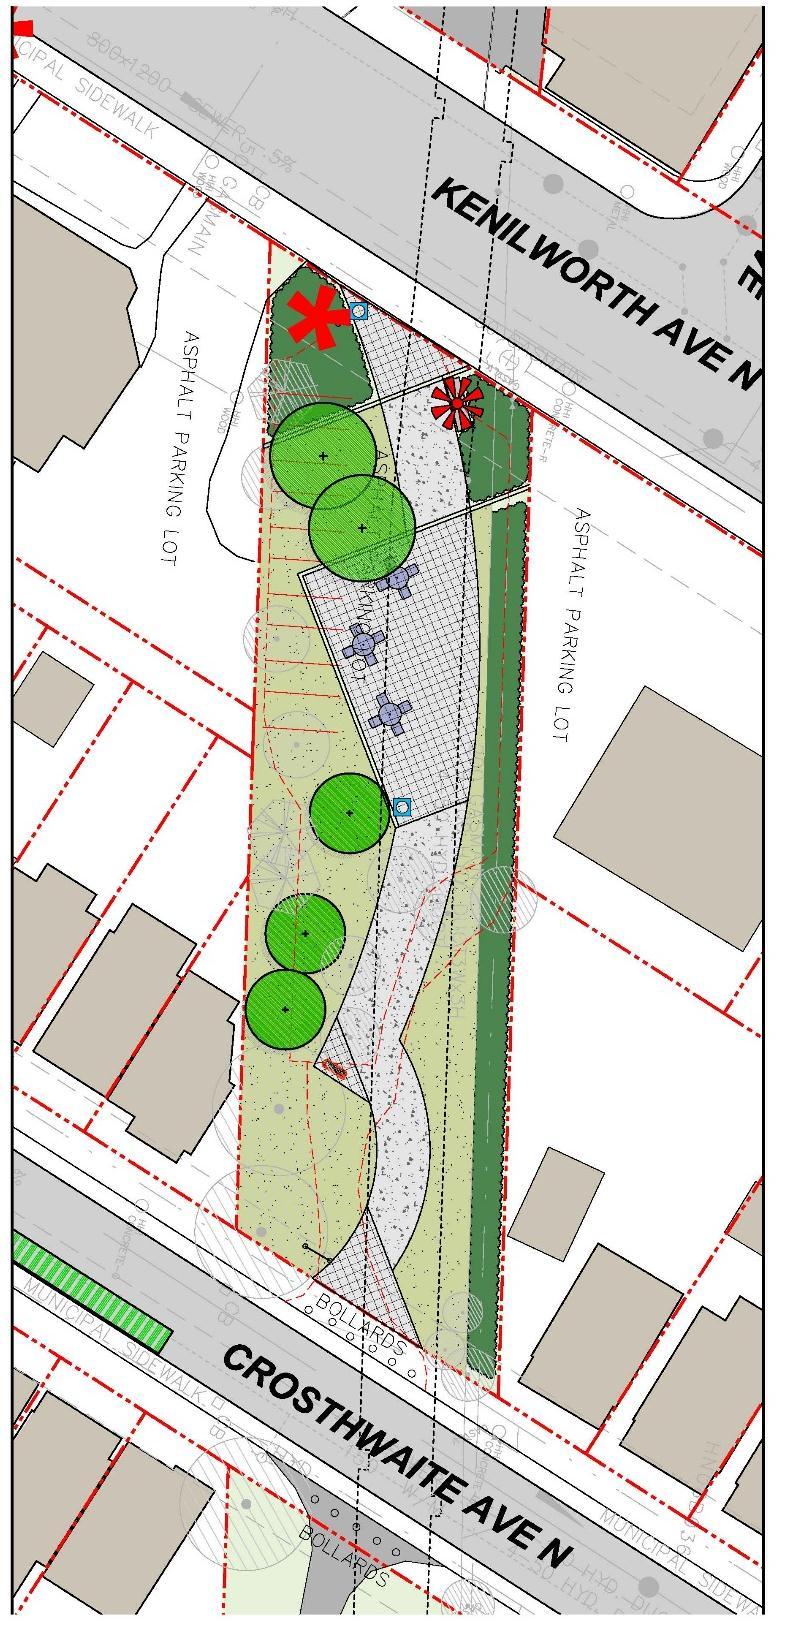 PROPOSED IMPROVEMENTS: Pedestrian Node HEDGE PLANTING EXISTING TREES EXISTING CONDITIONS BIKE RACKS/ BARRIER PIPELINE SOD PROPOSED TREES